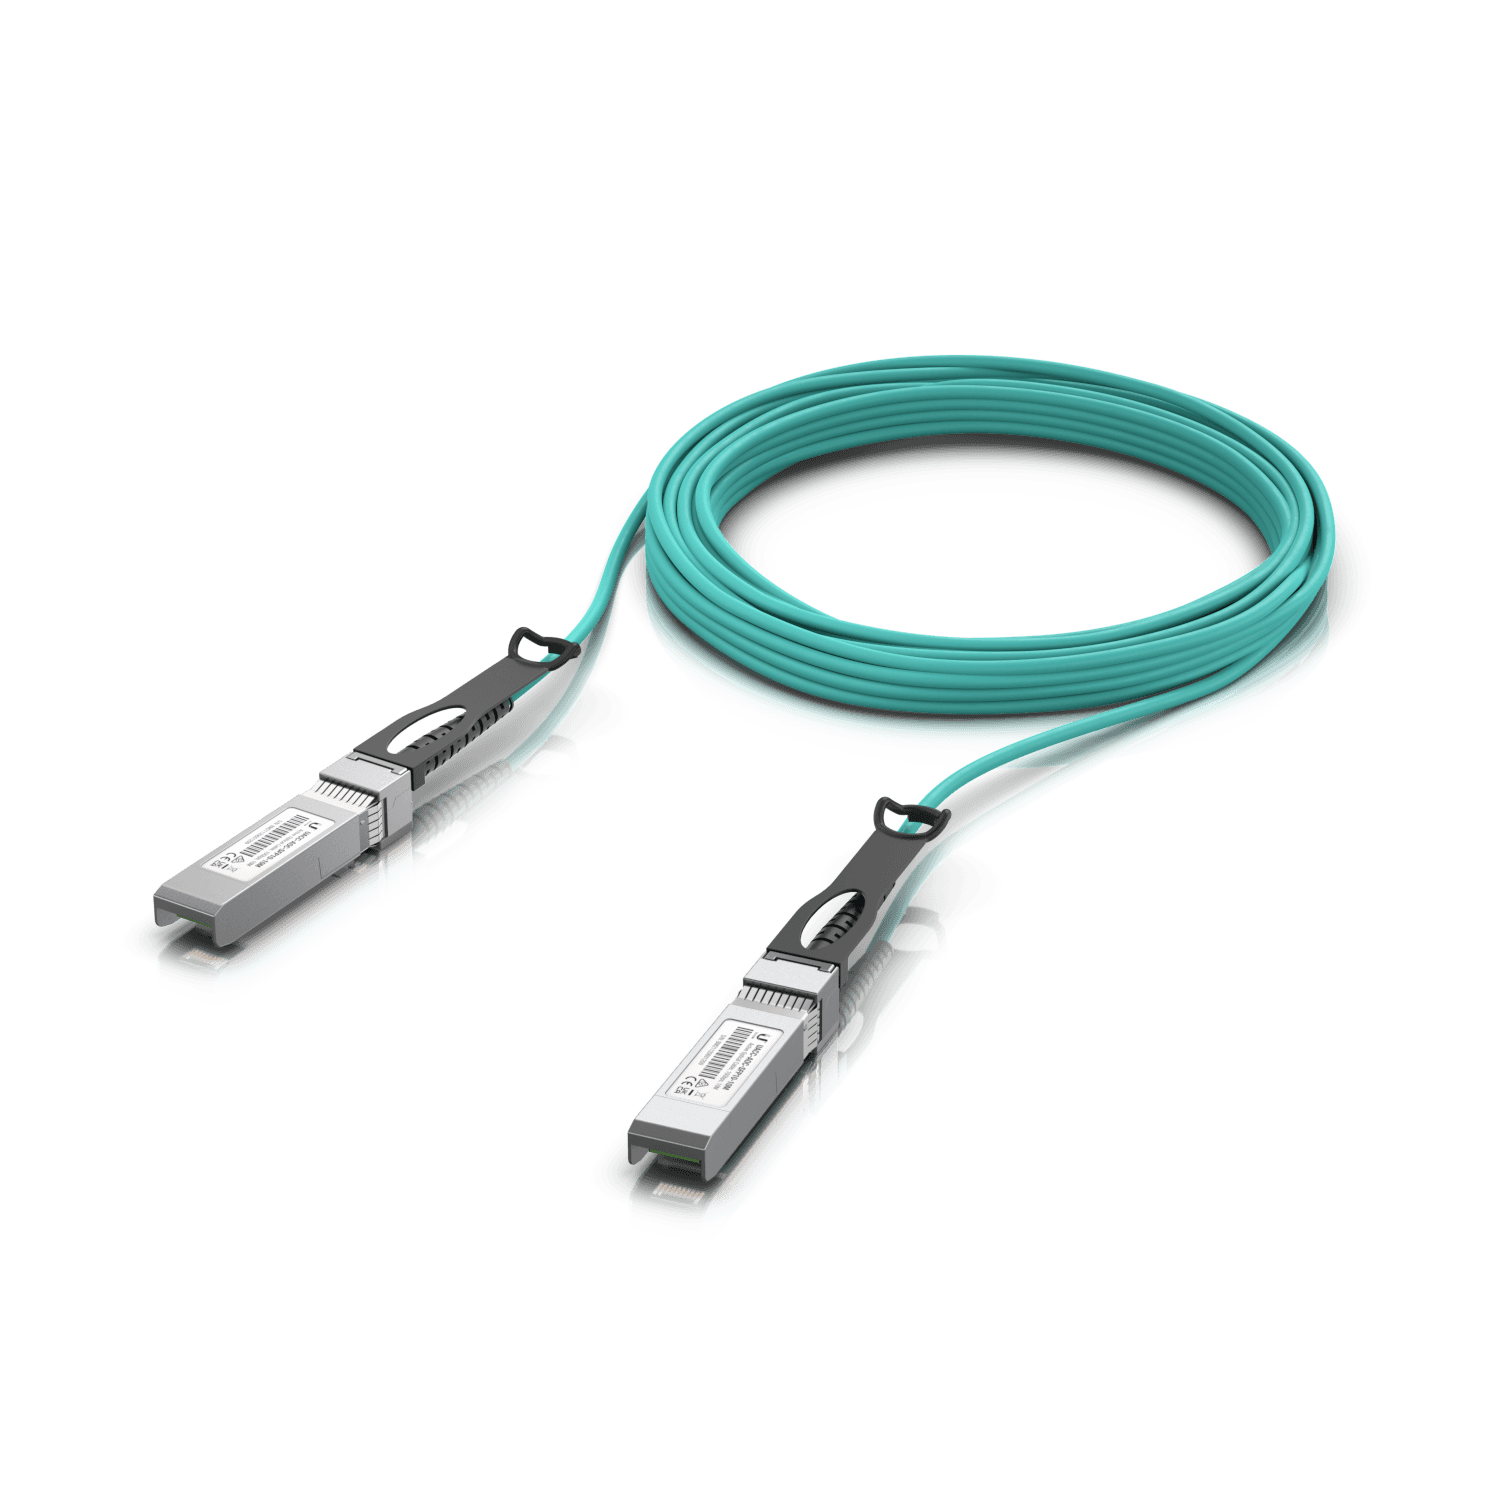 10 Gbps Long-Range Direct Attach Cable